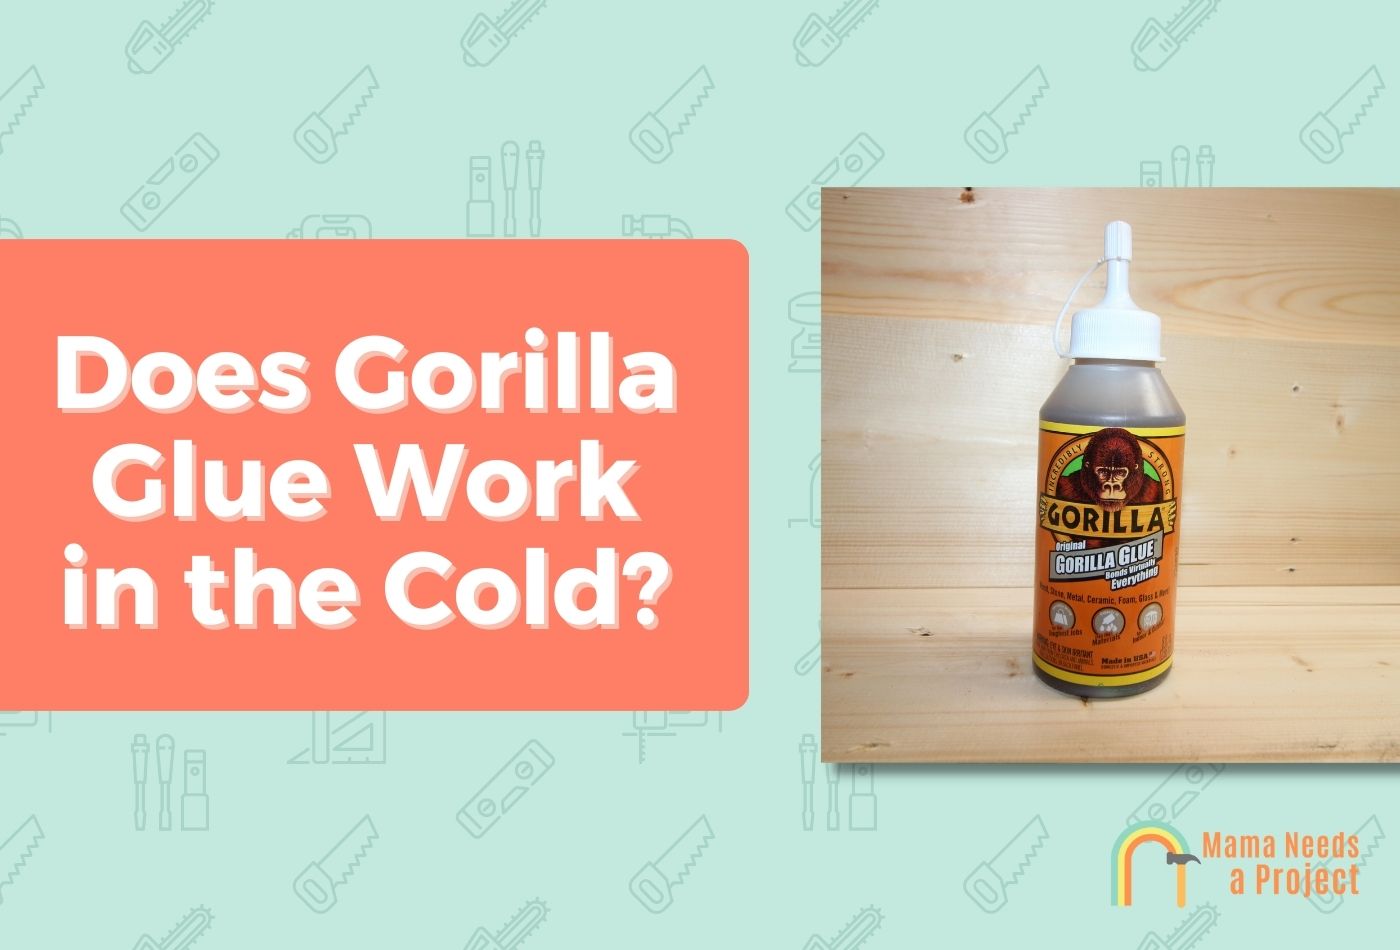 Does Gorilla Glue Work in the Cold